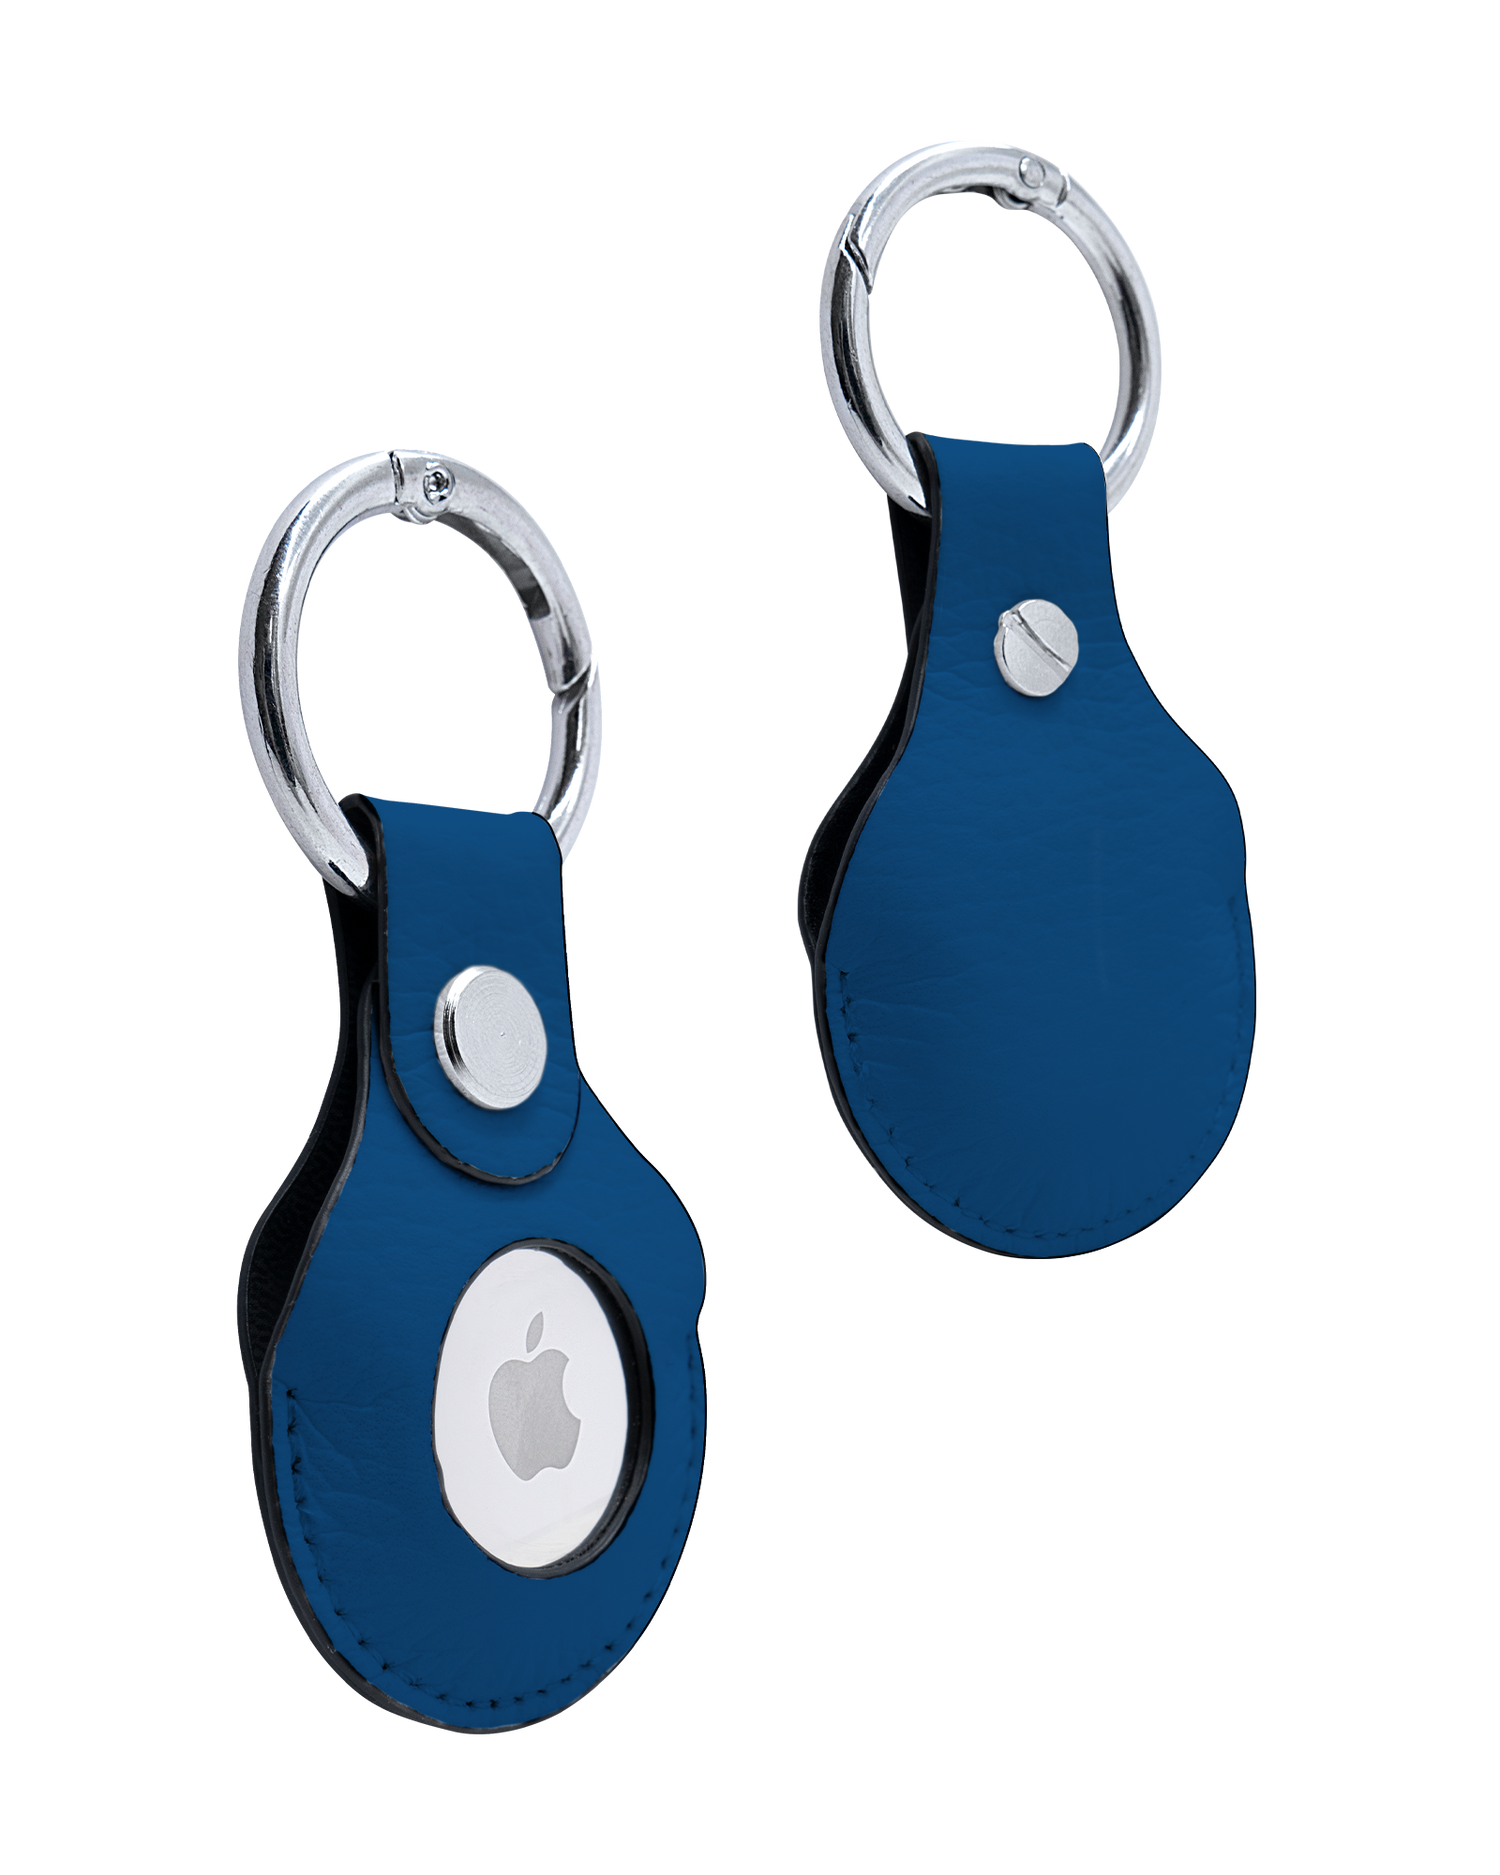 AirTag Holder with CLASSIC BLUE Design: Front and Back